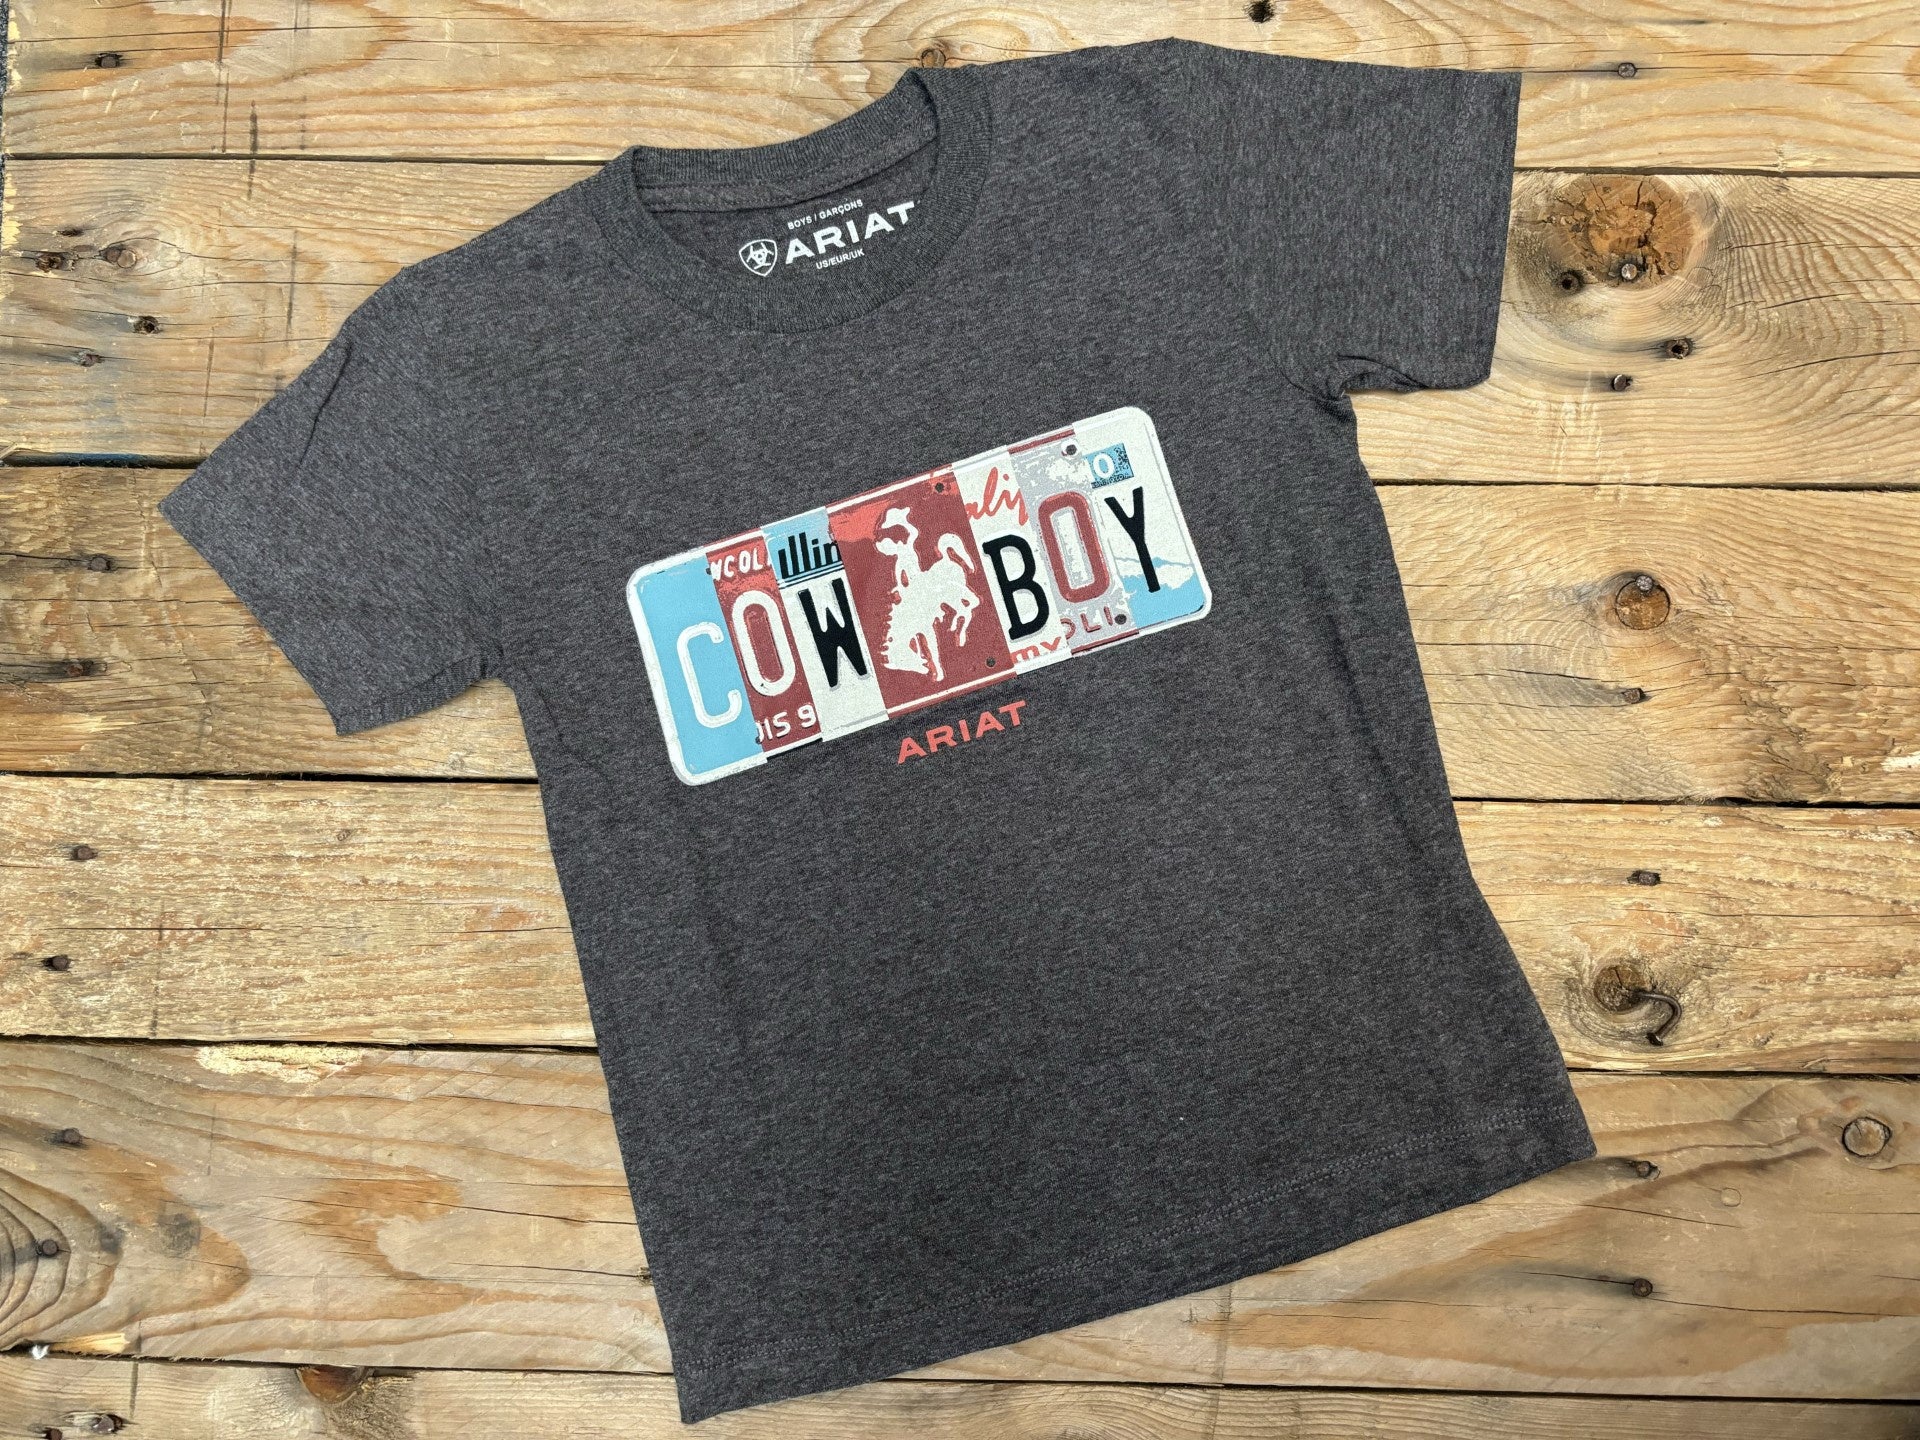 Boys Ariat License Plate Cowboy Tee - Charcoal Heather (7011985653837)